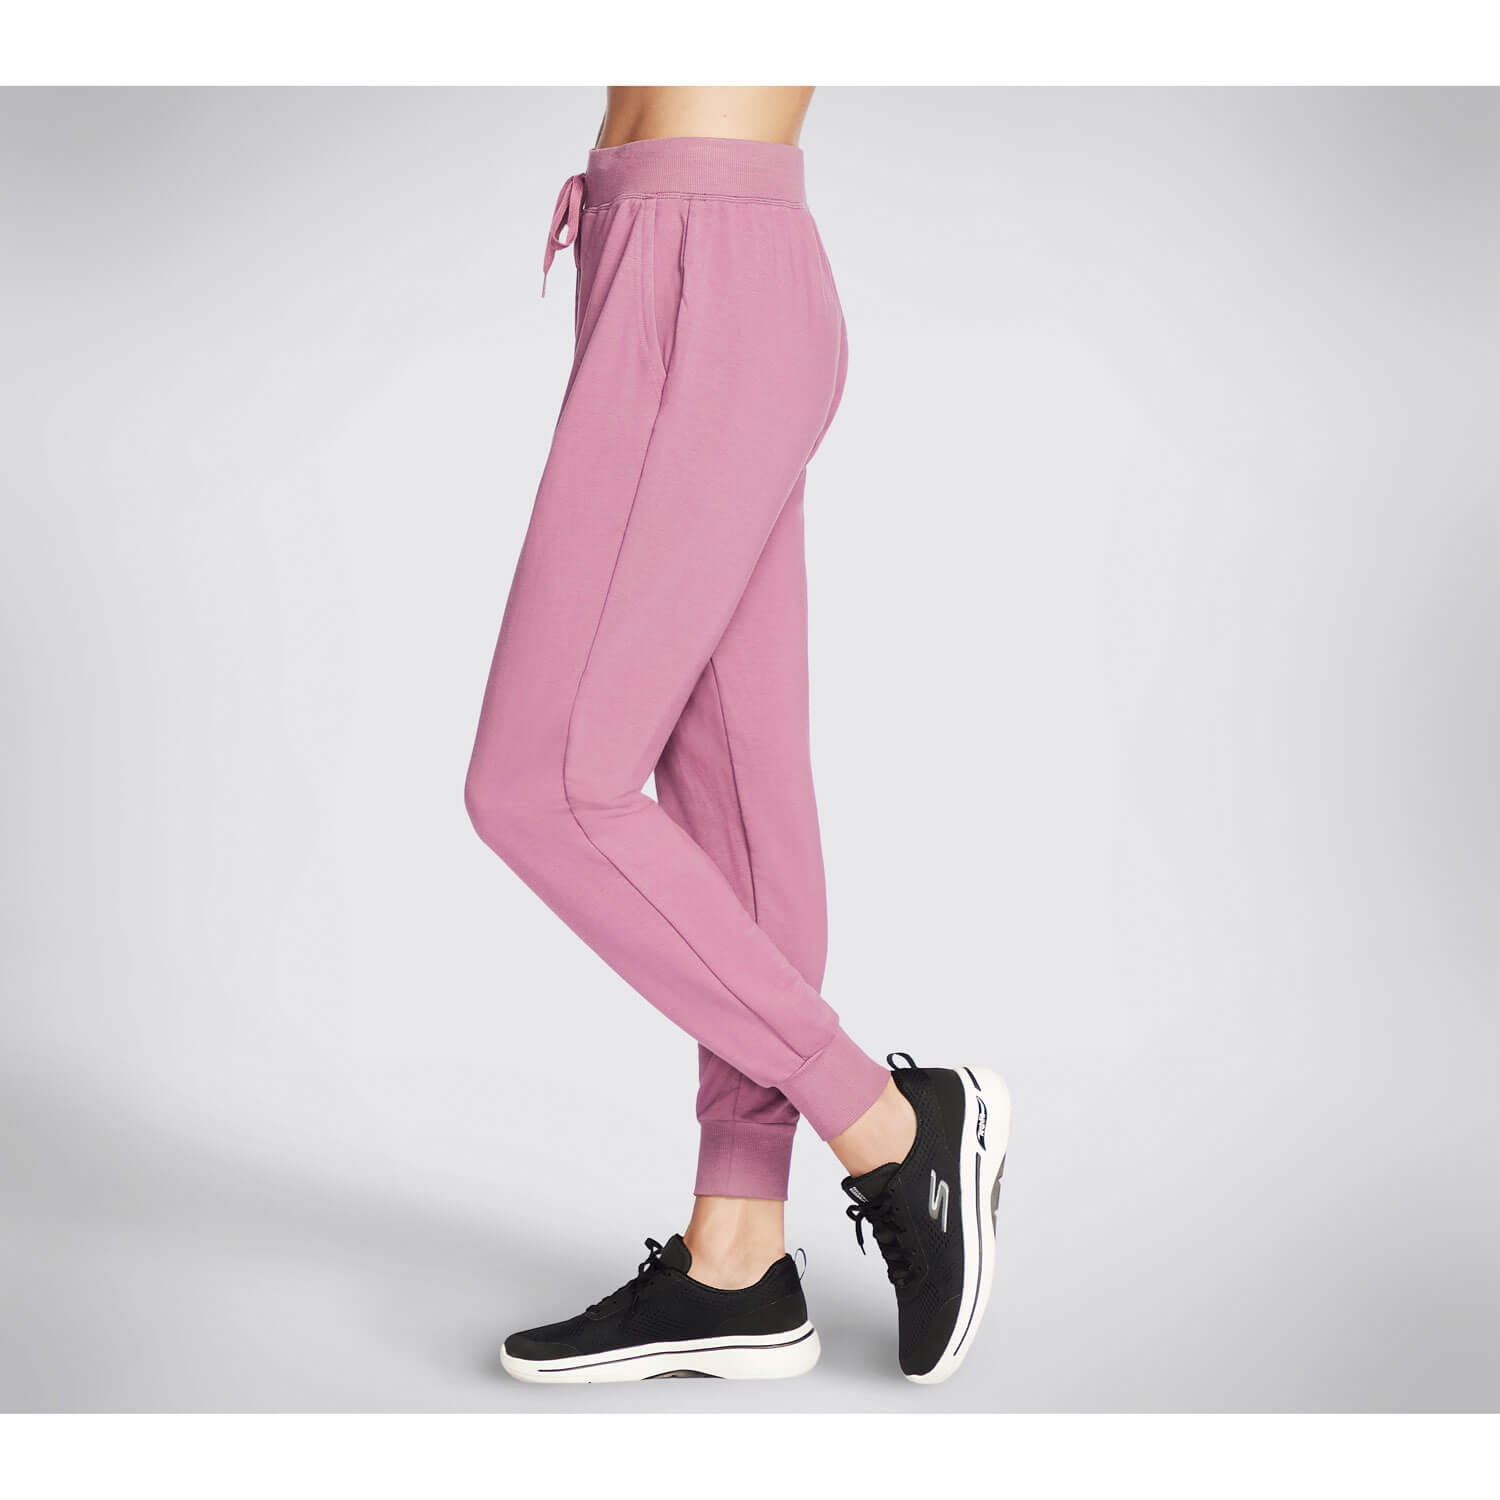 Skechers Apparel Skechluxe Restful Jogger Pant 2 Shaws Department Stores